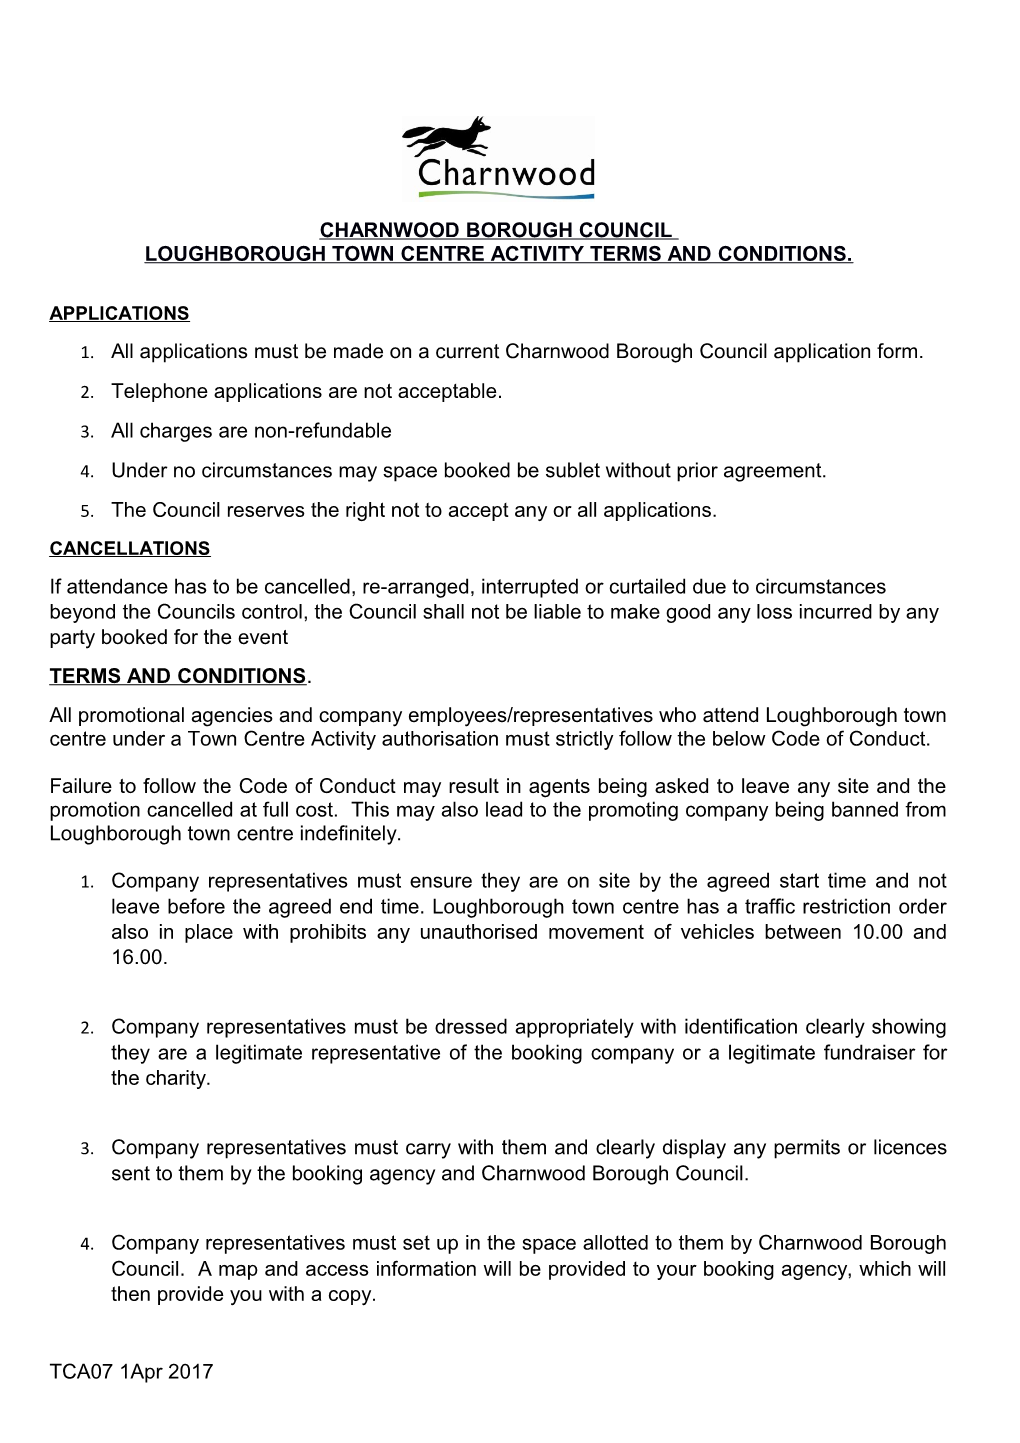 Loughborough Town Centre Activity Terms and Conditions